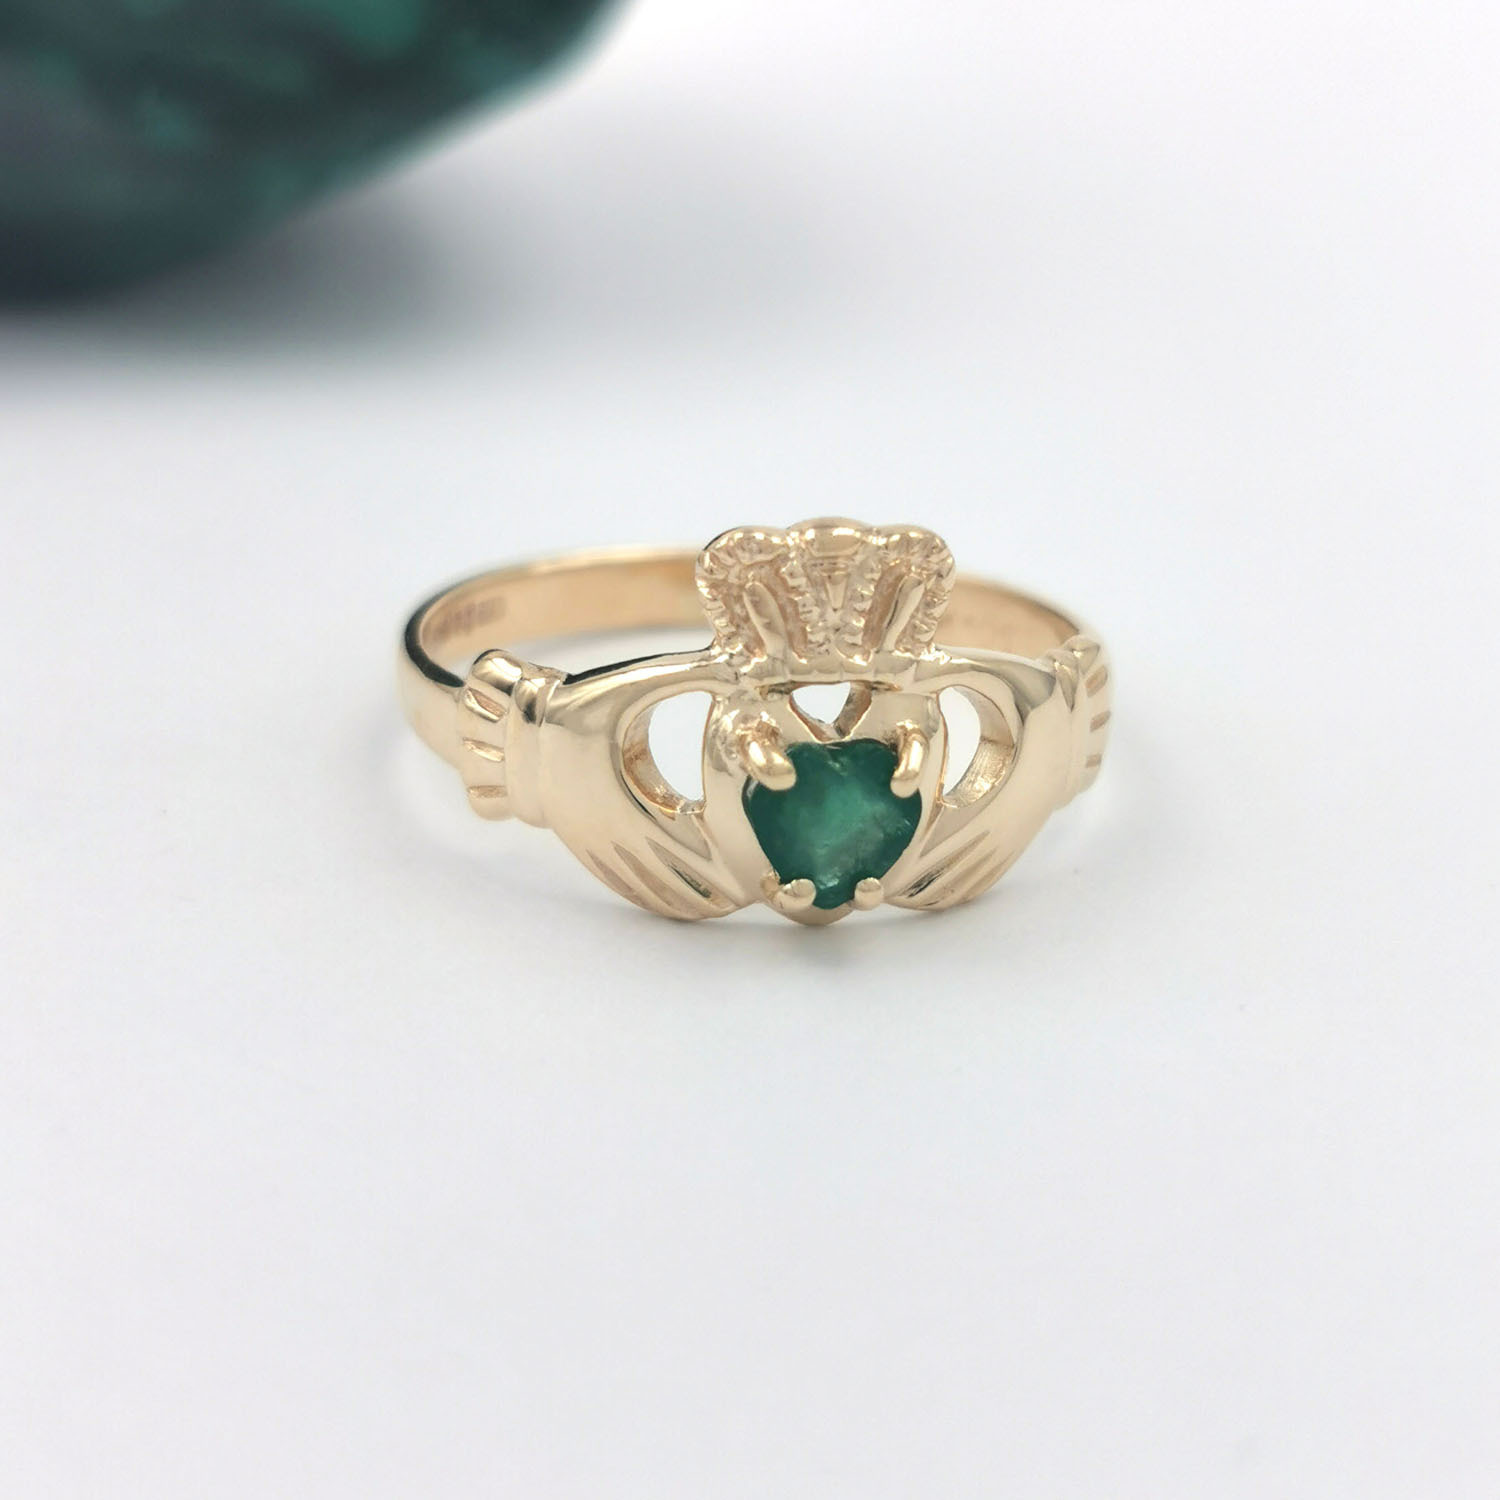 14K Gold Claddagh Ring with Inlaid Emerald Heart, Made in